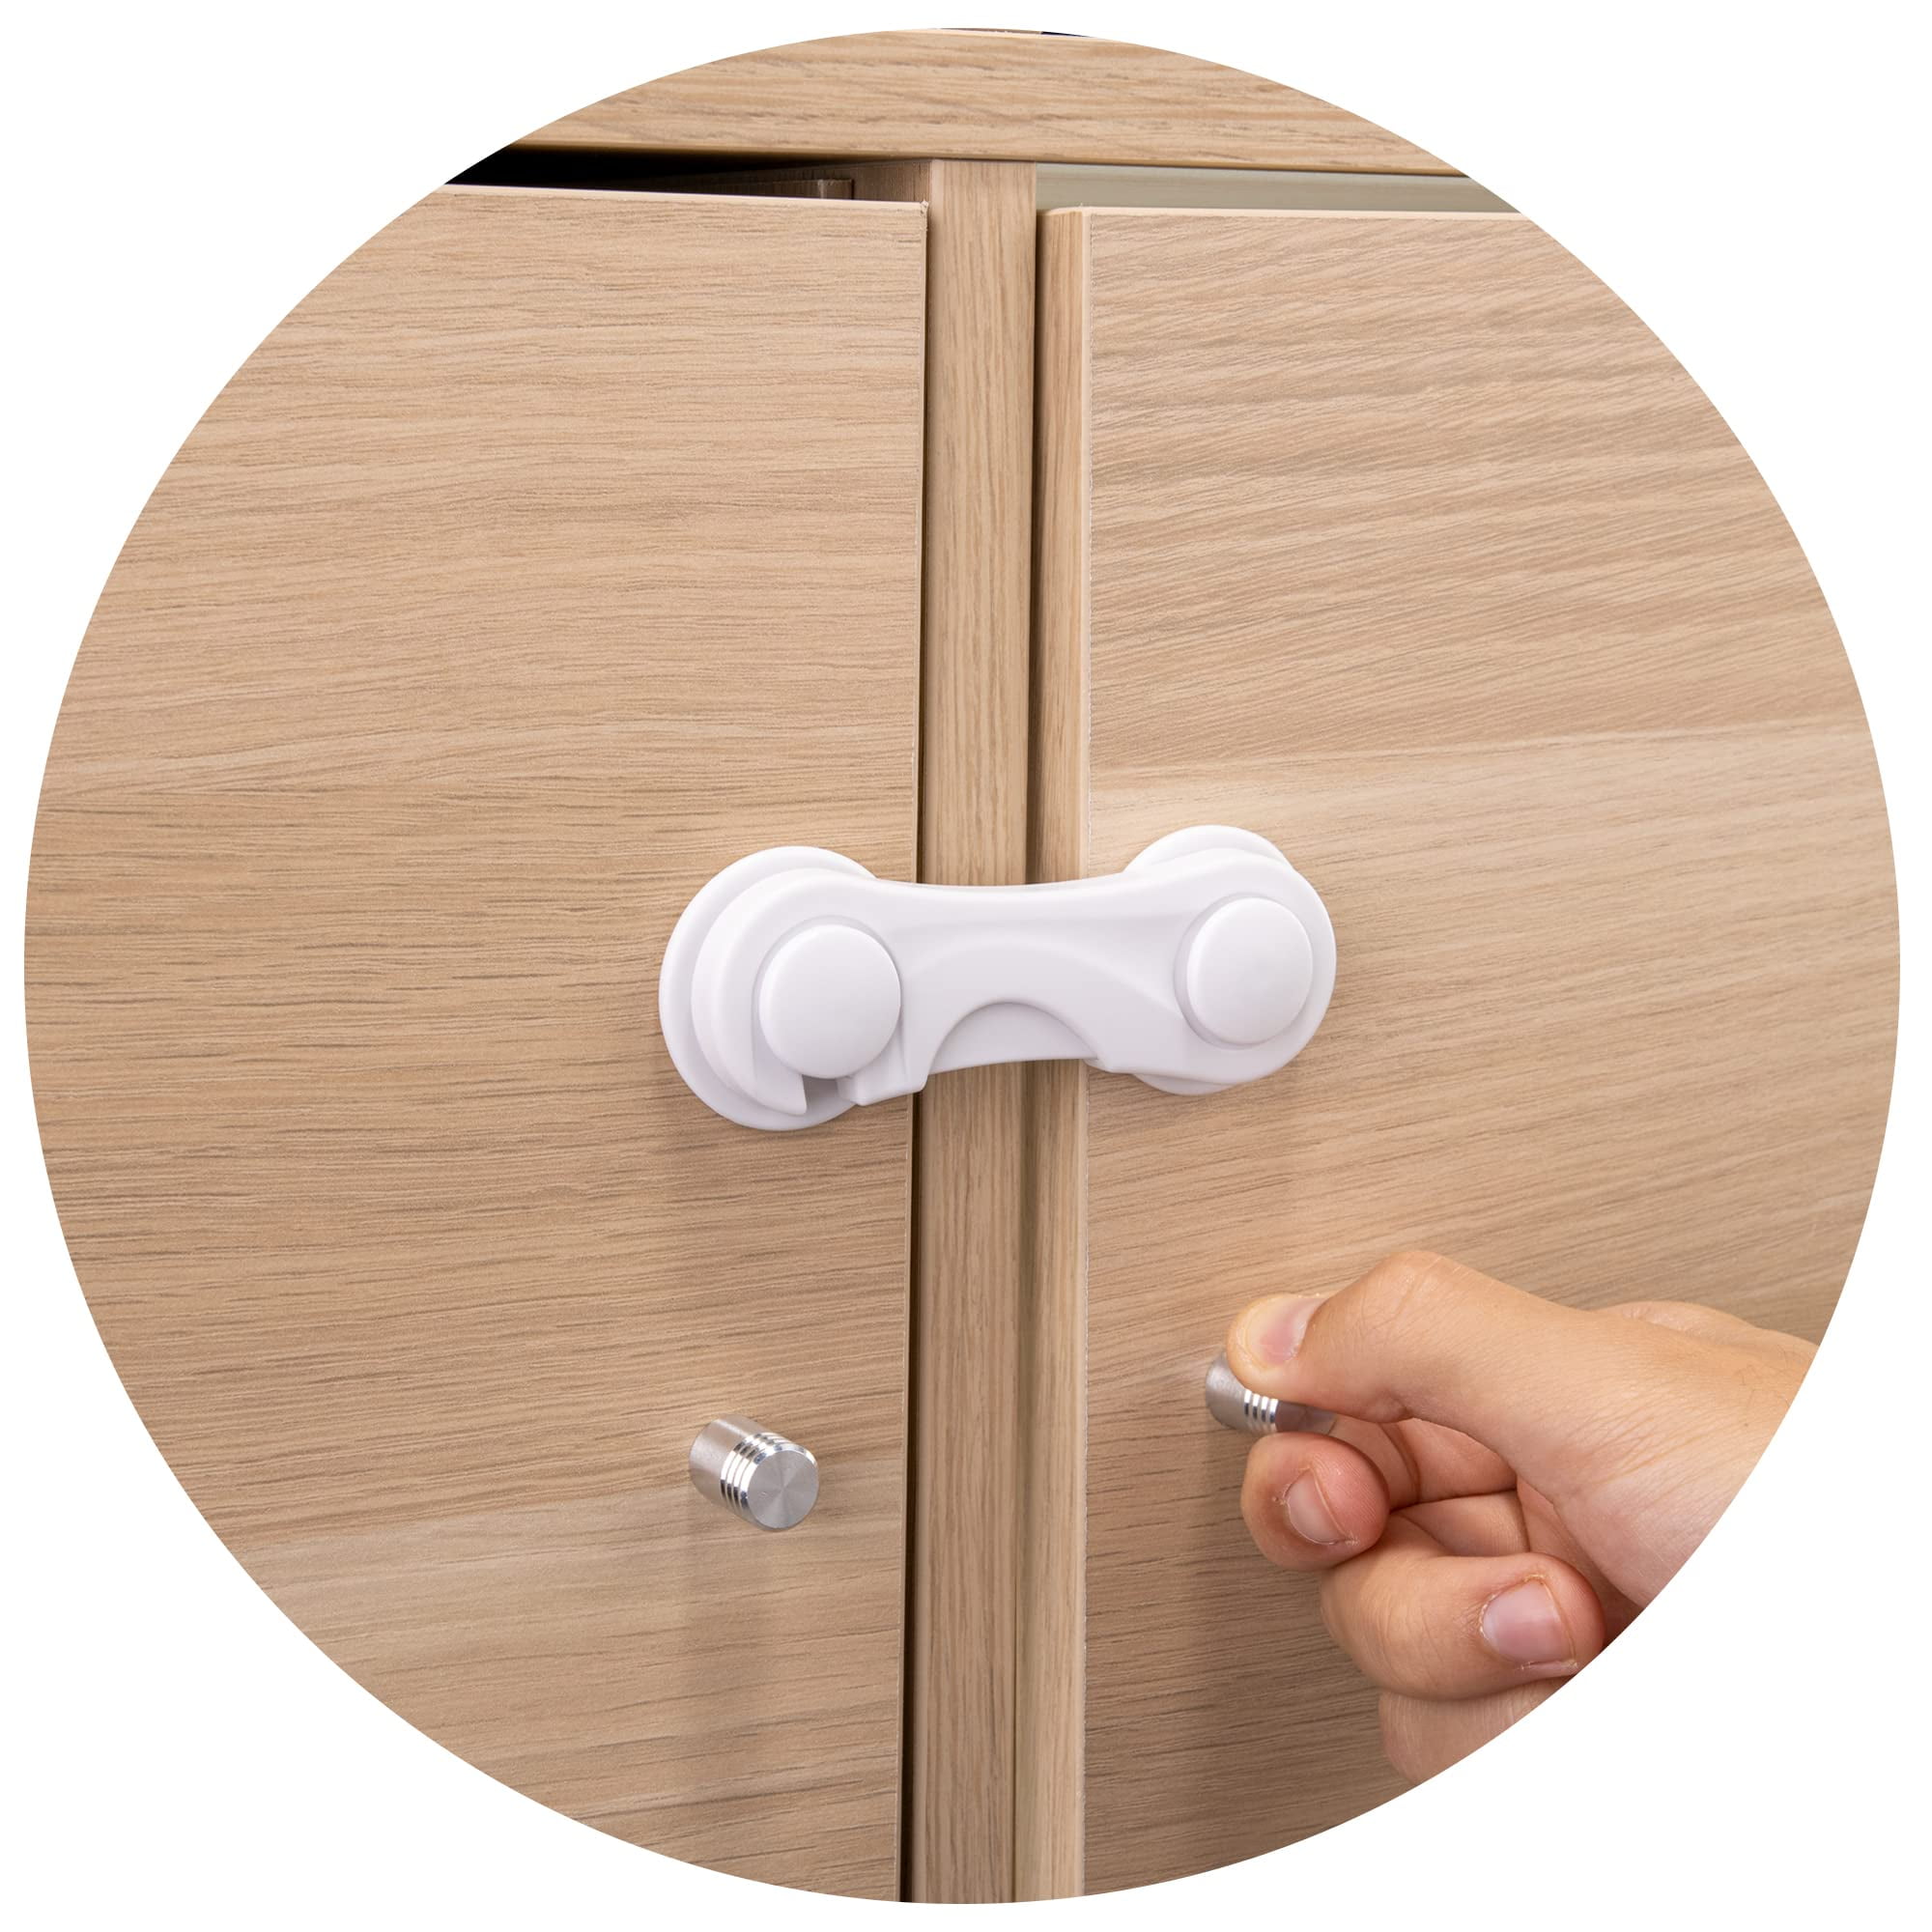 Cabinet Locks for Babies, Baby Proofing Safety Locks, 10 Pack DUOSI No  Screws No Magnets Fridge Refrigerators Locks Baby Proofing Child Safety  Cabinet